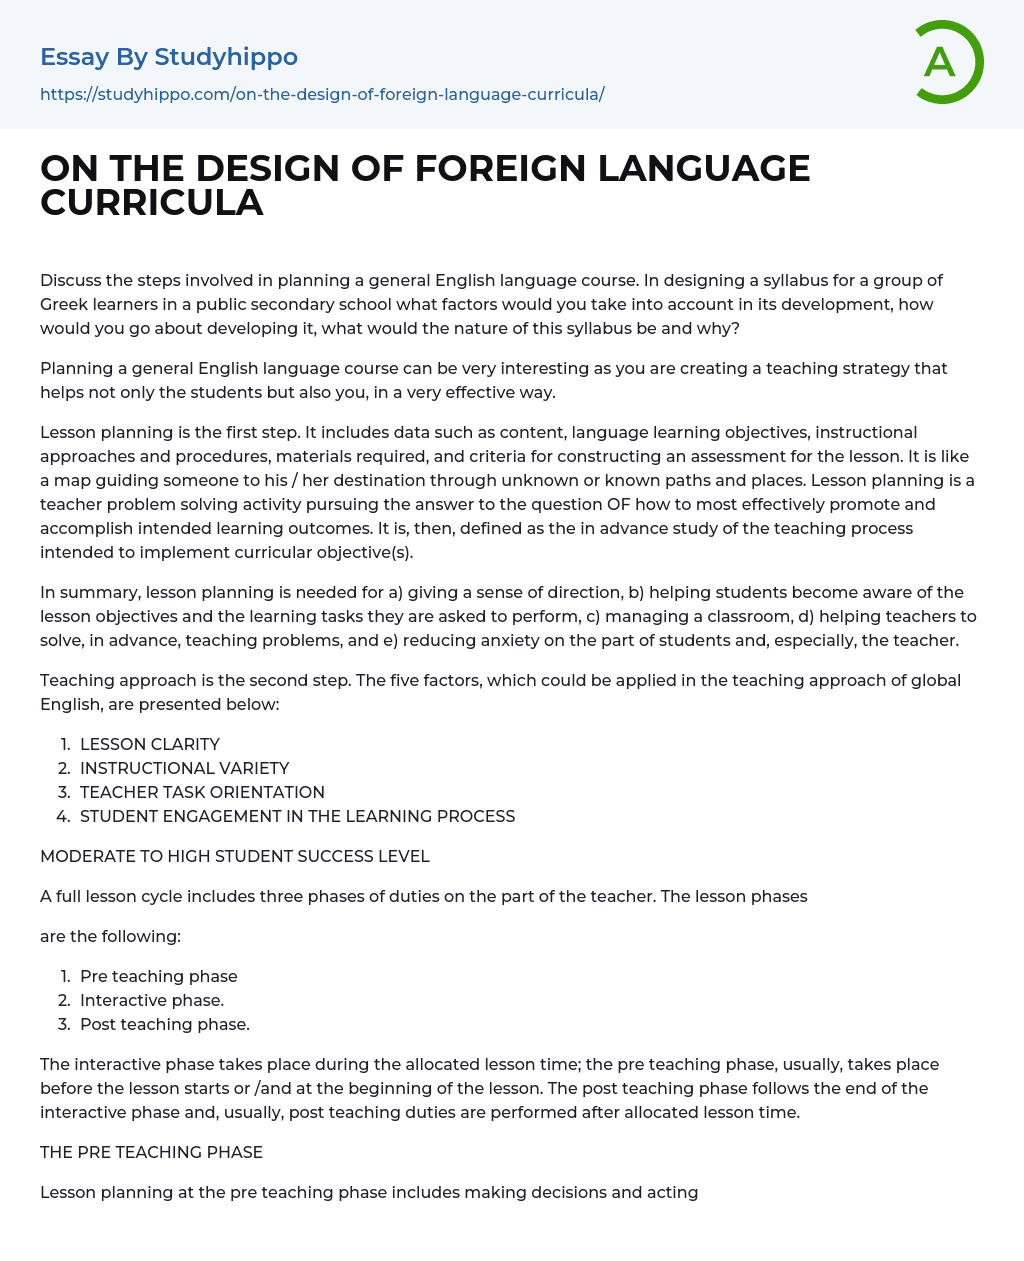 ON THE DESIGN OF FOREIGN LANGUAGE CURRICULA Essay Example